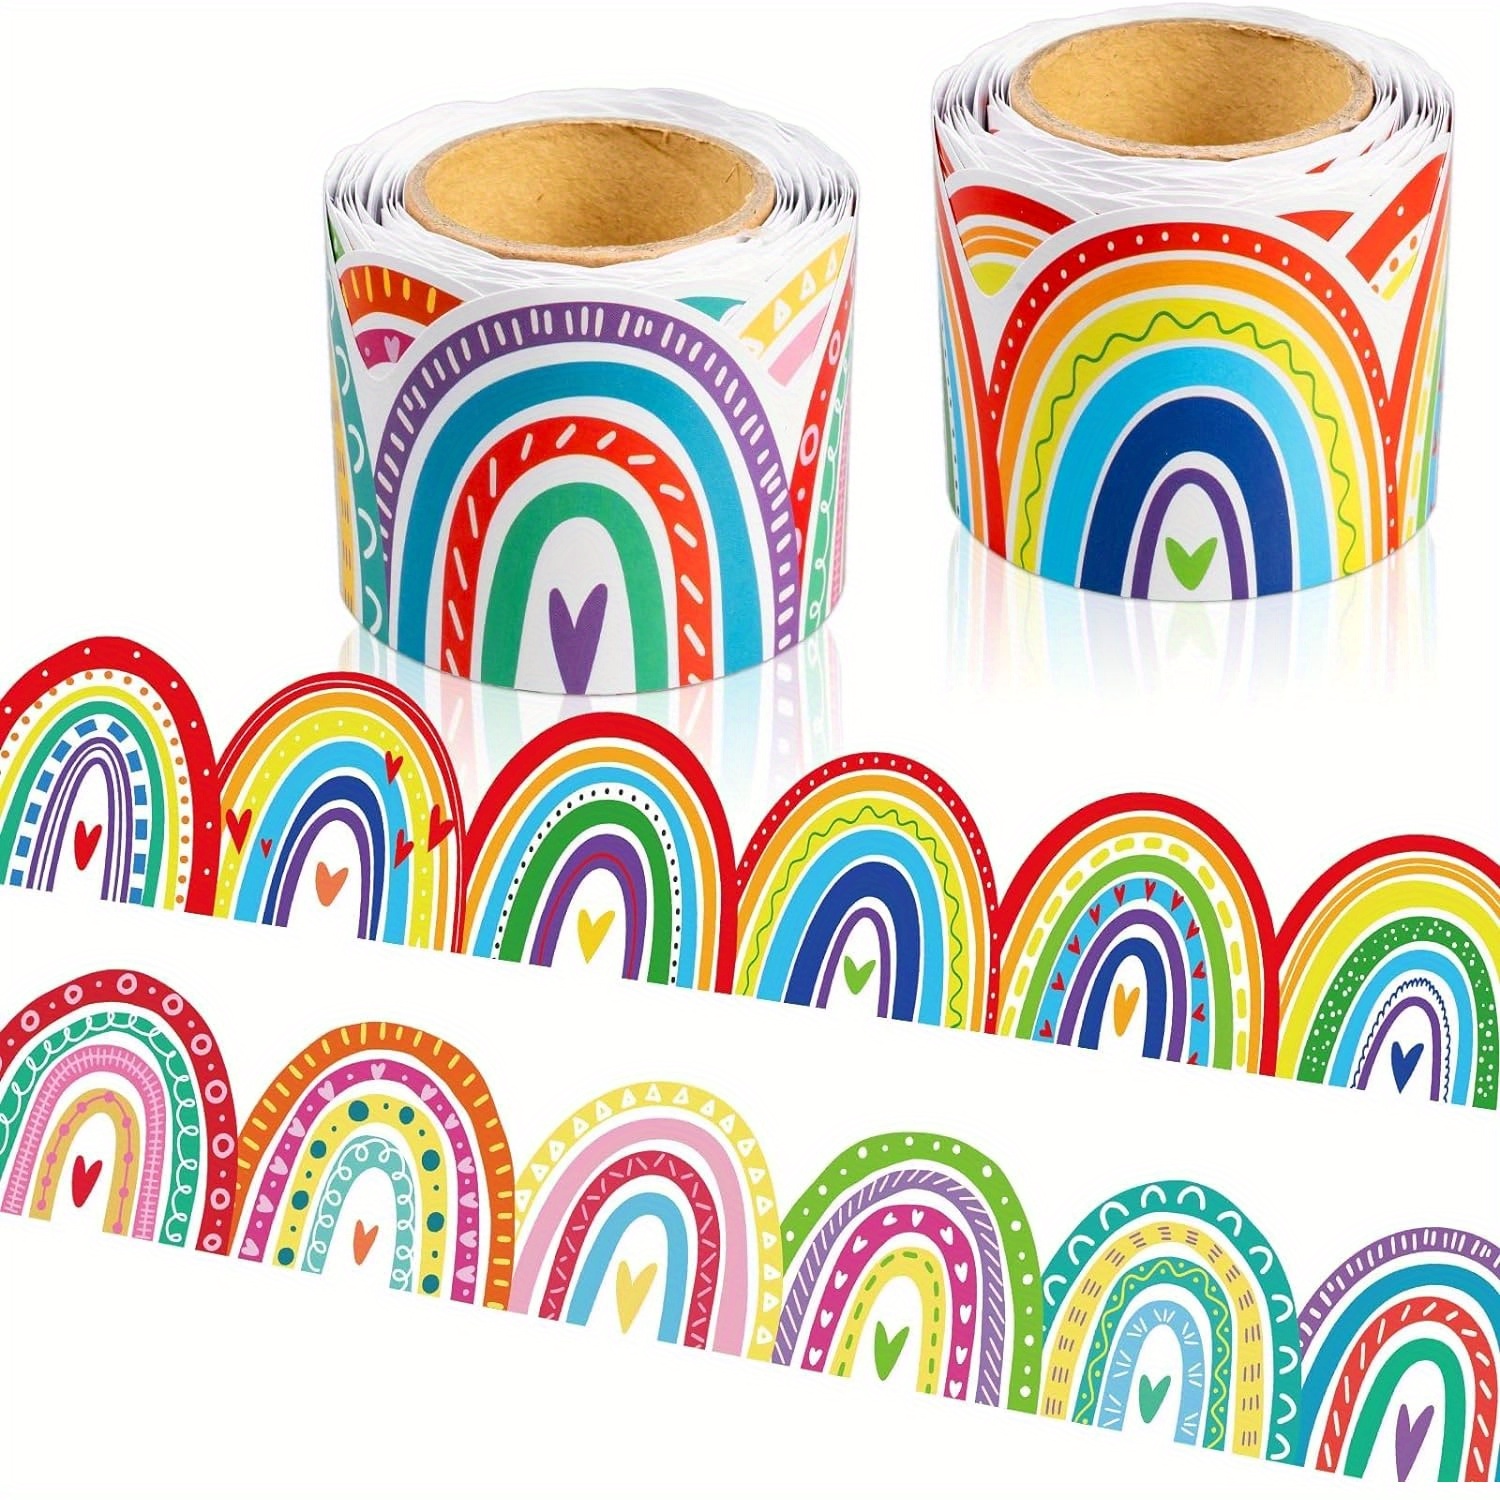 

1 Roll/30ft, Bulletin Board Border Decorations - Rainbow Coated Classroom Rolled Border Trim For Classroom Back To School Chalkboard Board Border Decor